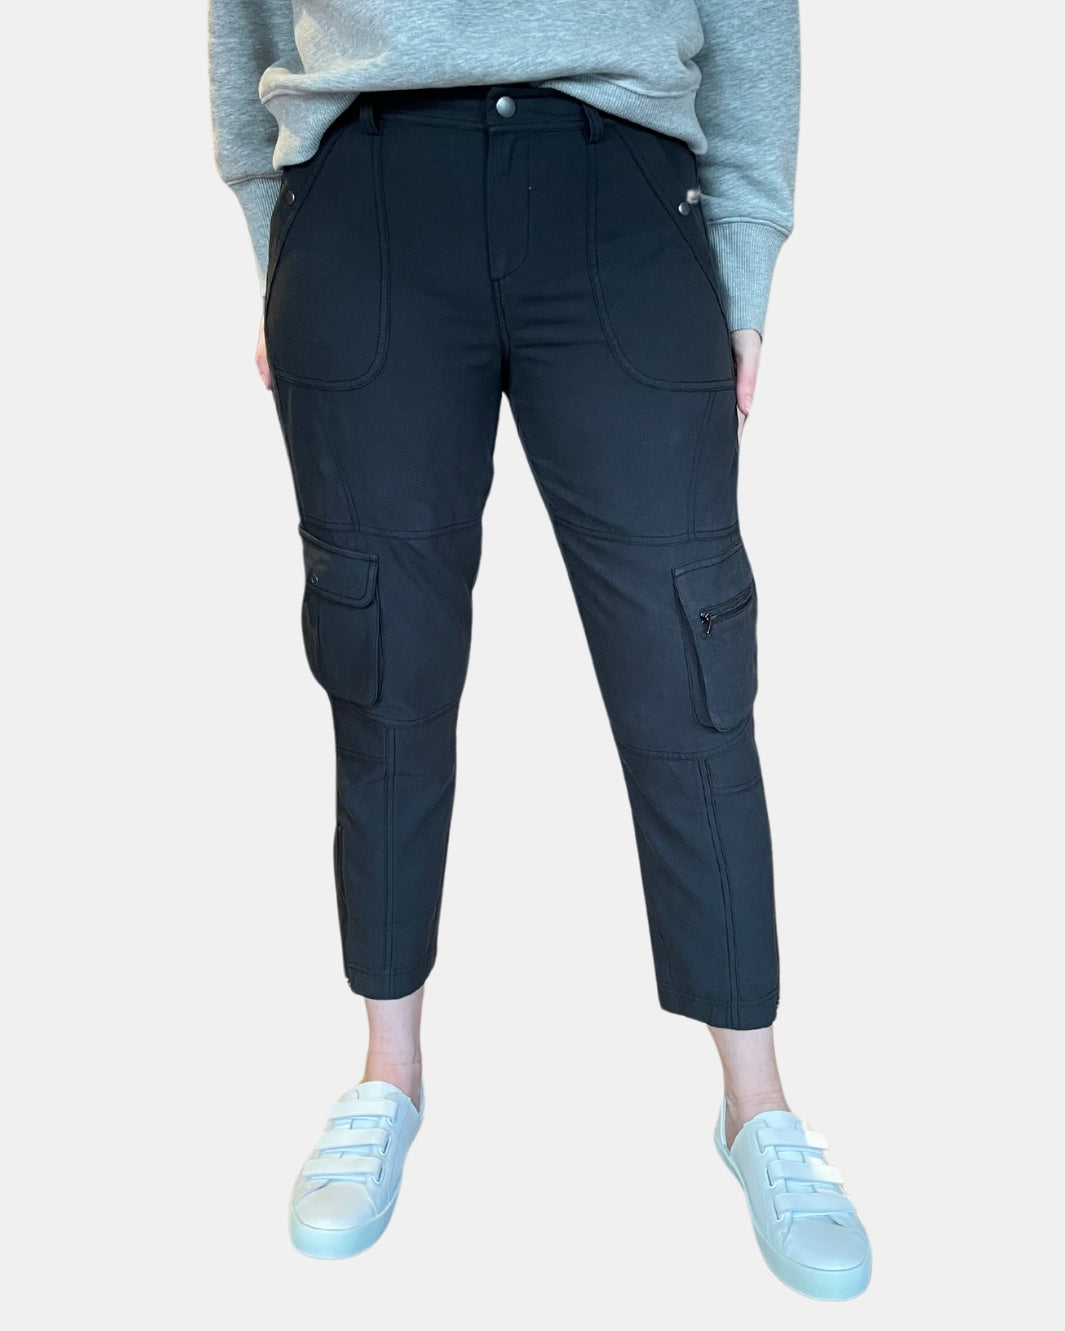 GO UTILITY PANT REDUX IN WASHED BLACK - Romi Boutique